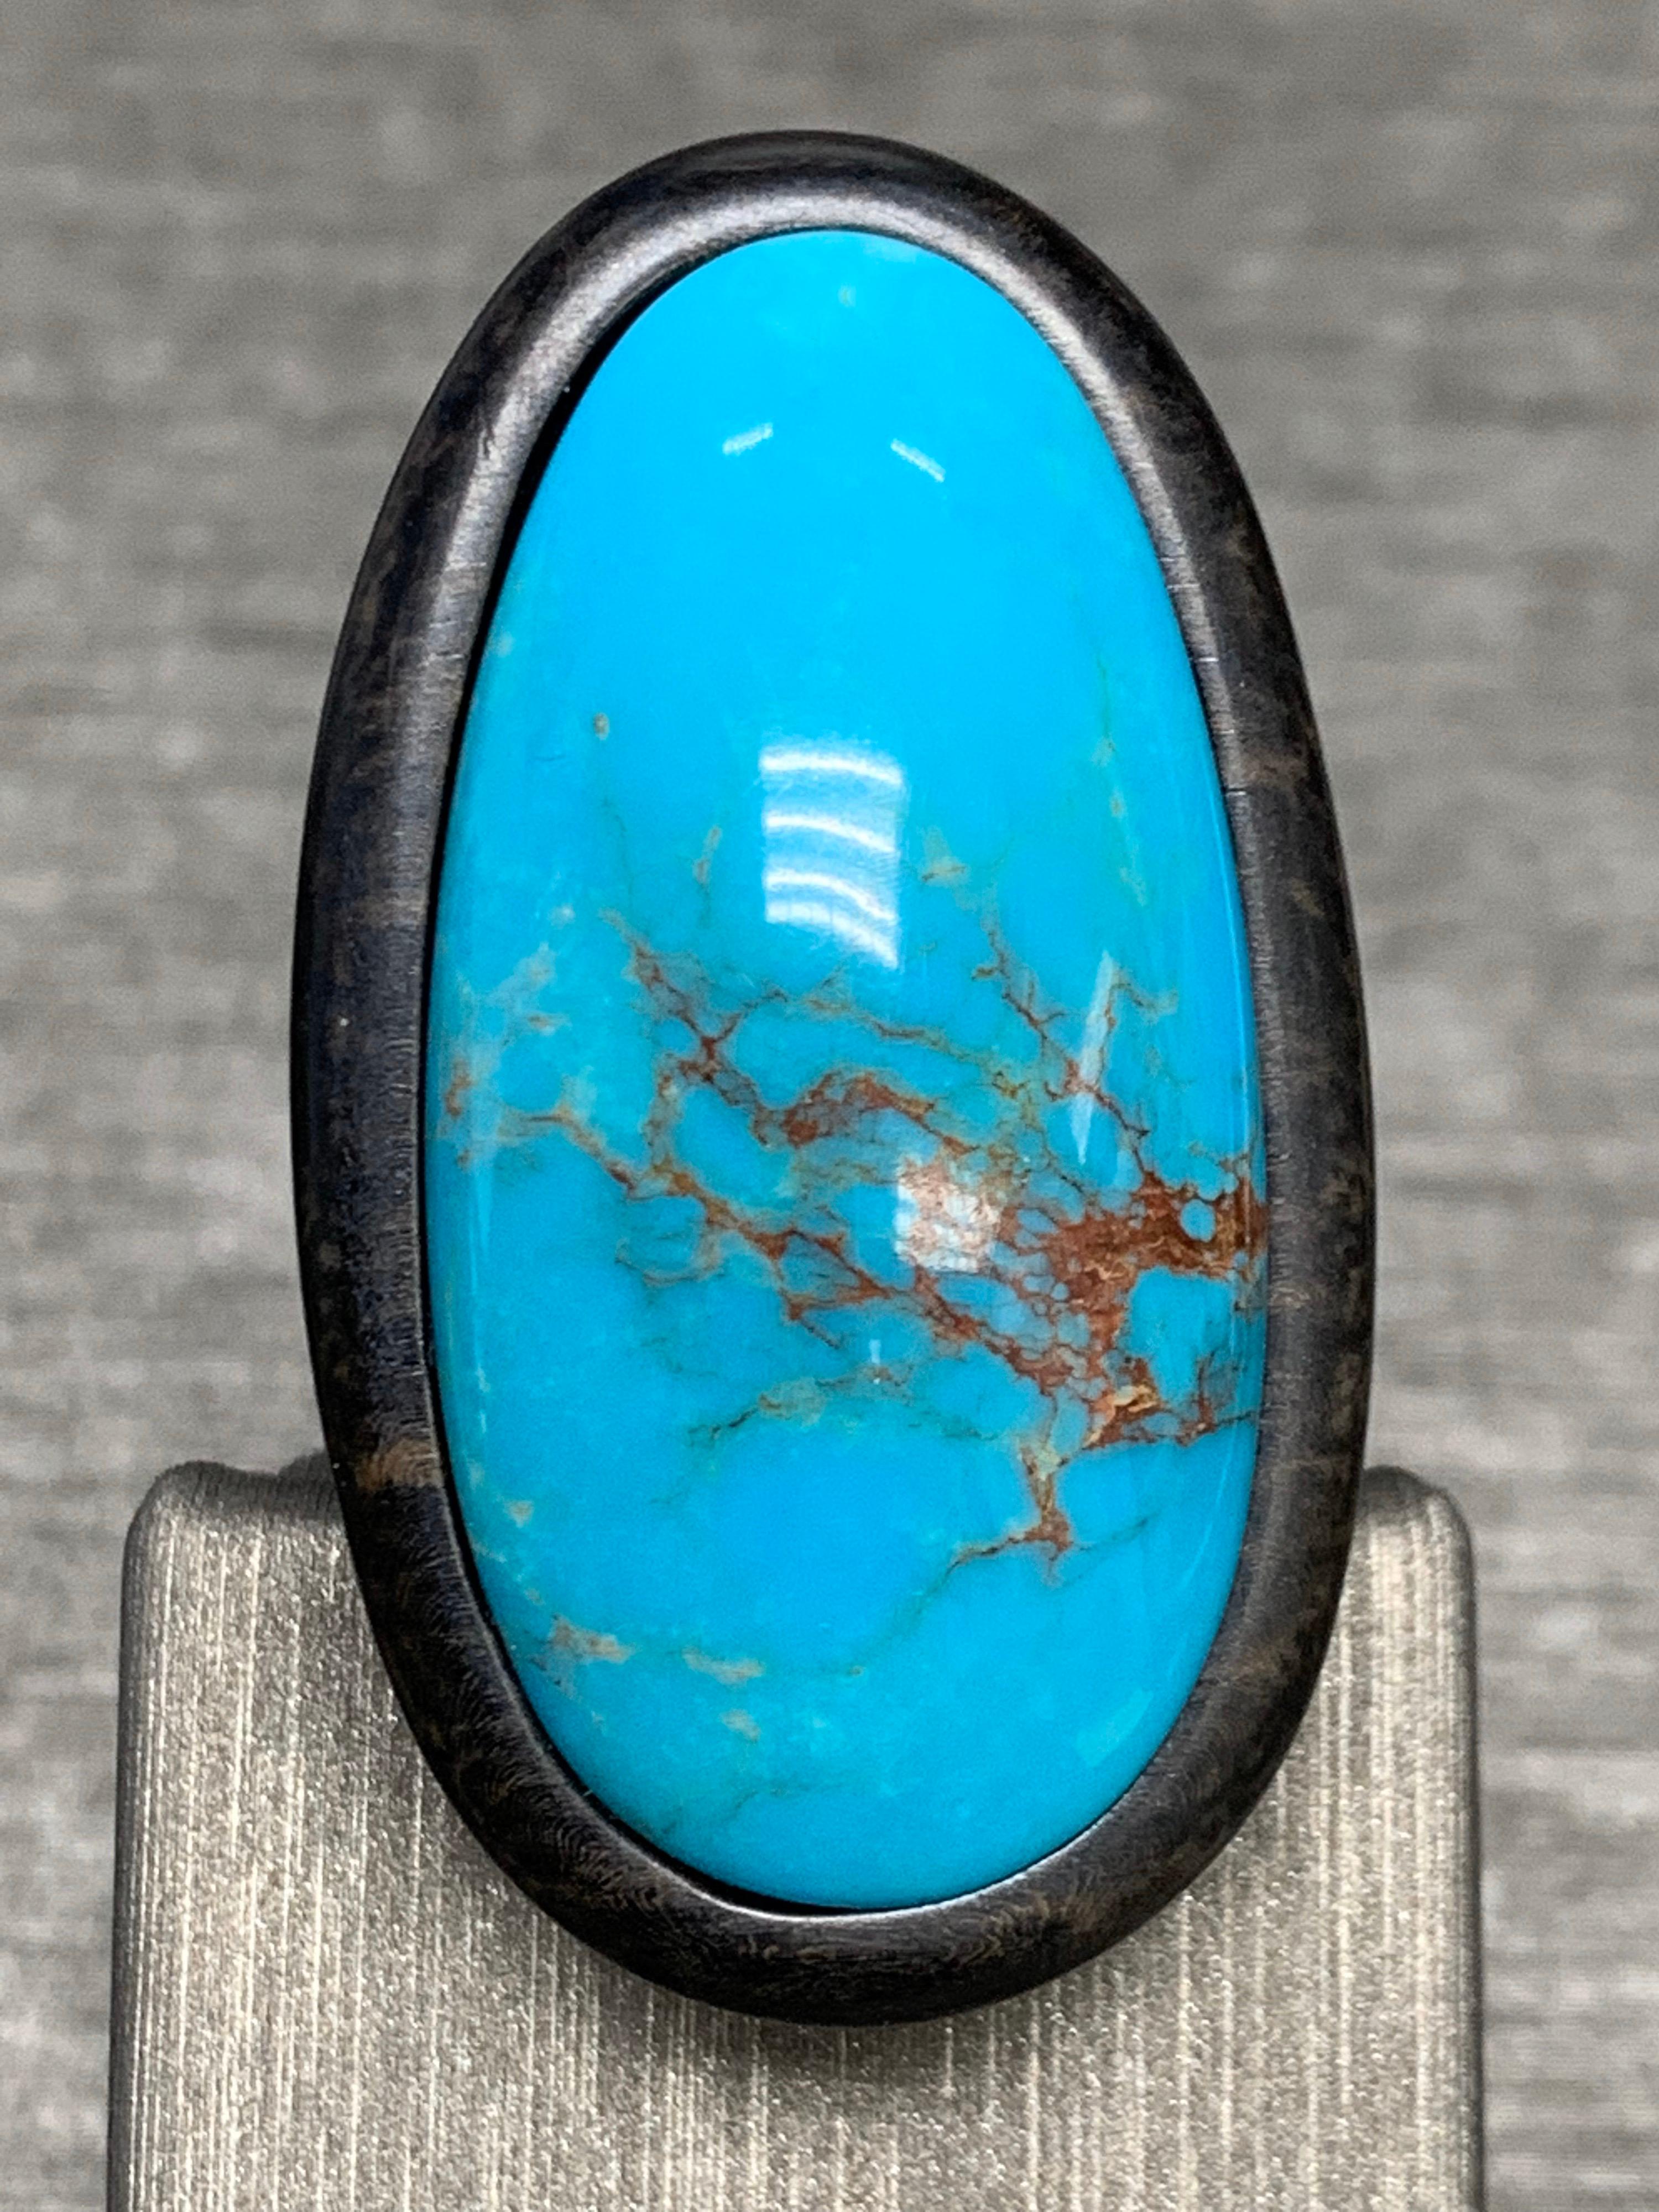 Oval Turquoise, Ebony Wood Ring, Made in Italy. 

Featuring an Oval Turquoise Stone, Ebony Wood Ring, Hand Carved from Italy.  

This one-of-a-kind ring was created by hand is certified, appraisal included, 100% insured. Processed and shipped within